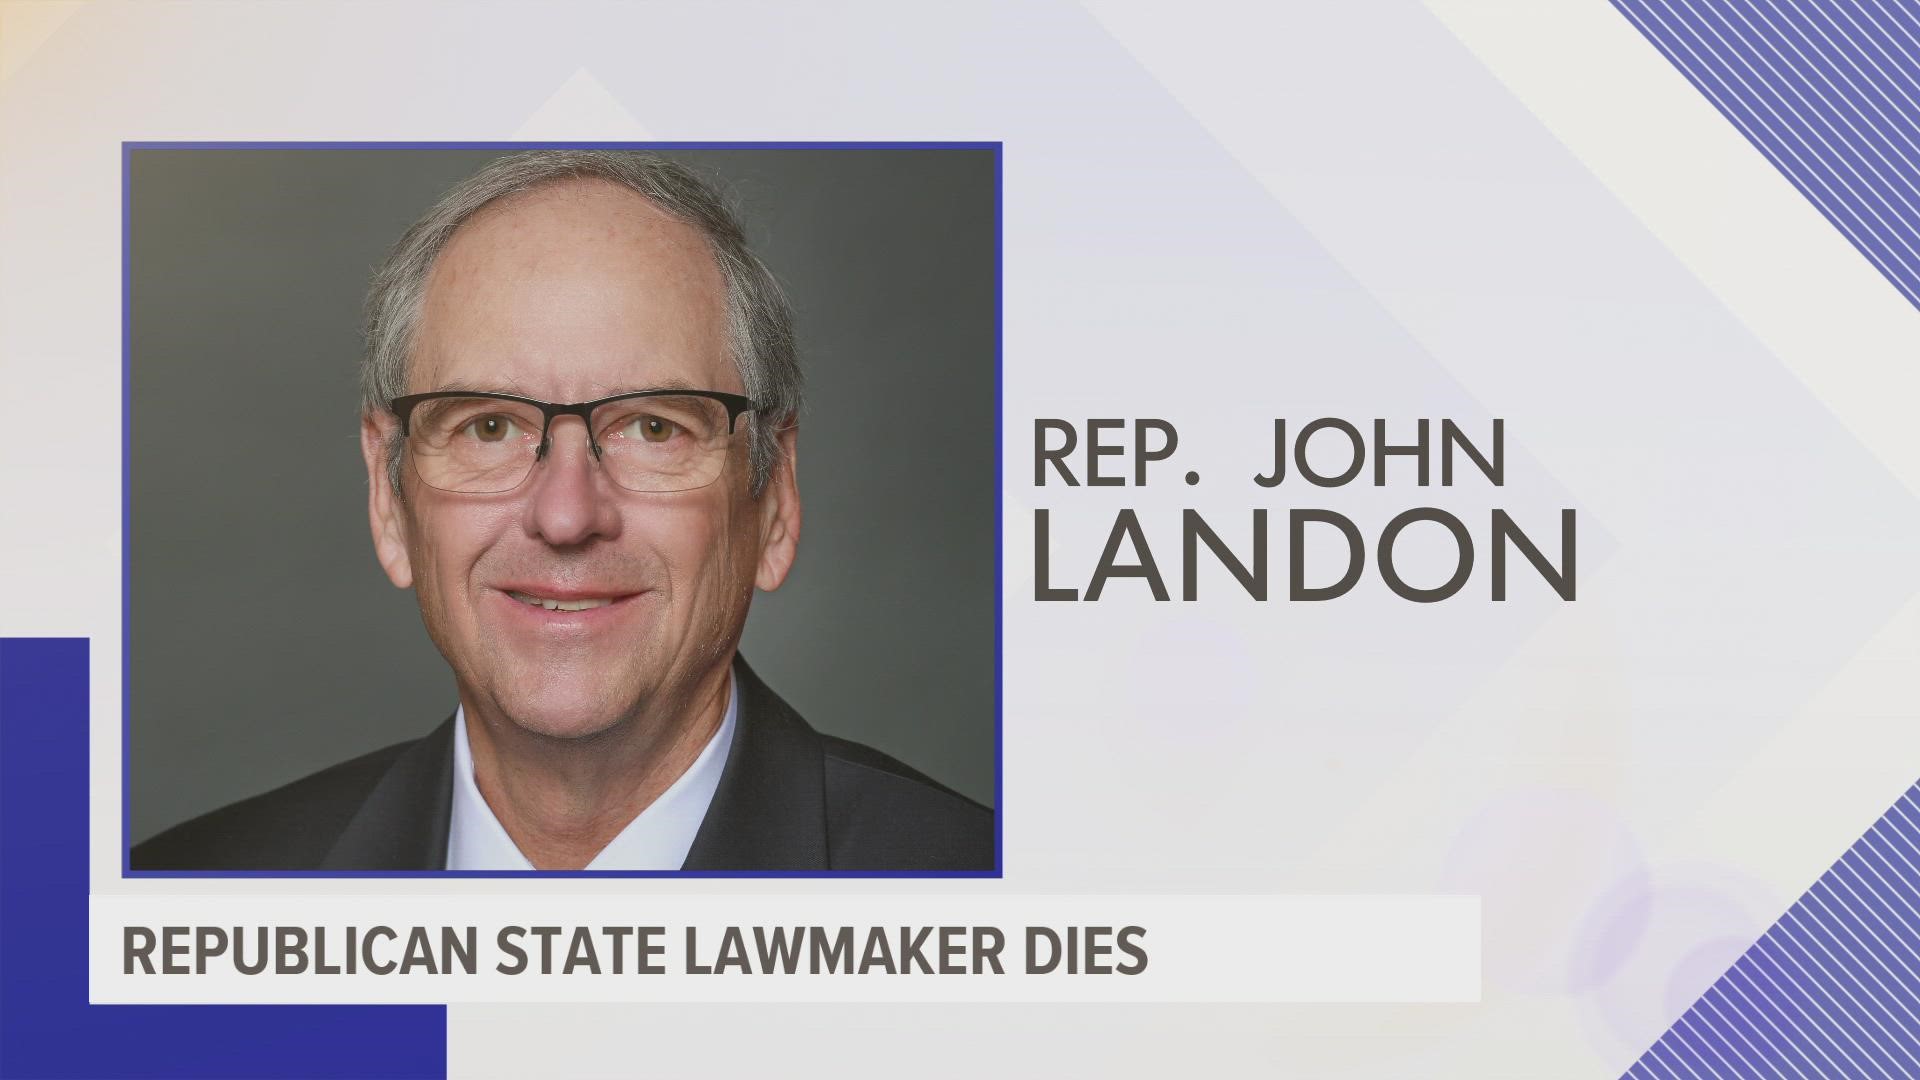 The Republican state lawmaker had served as a representative in the Iowa House since 2013.